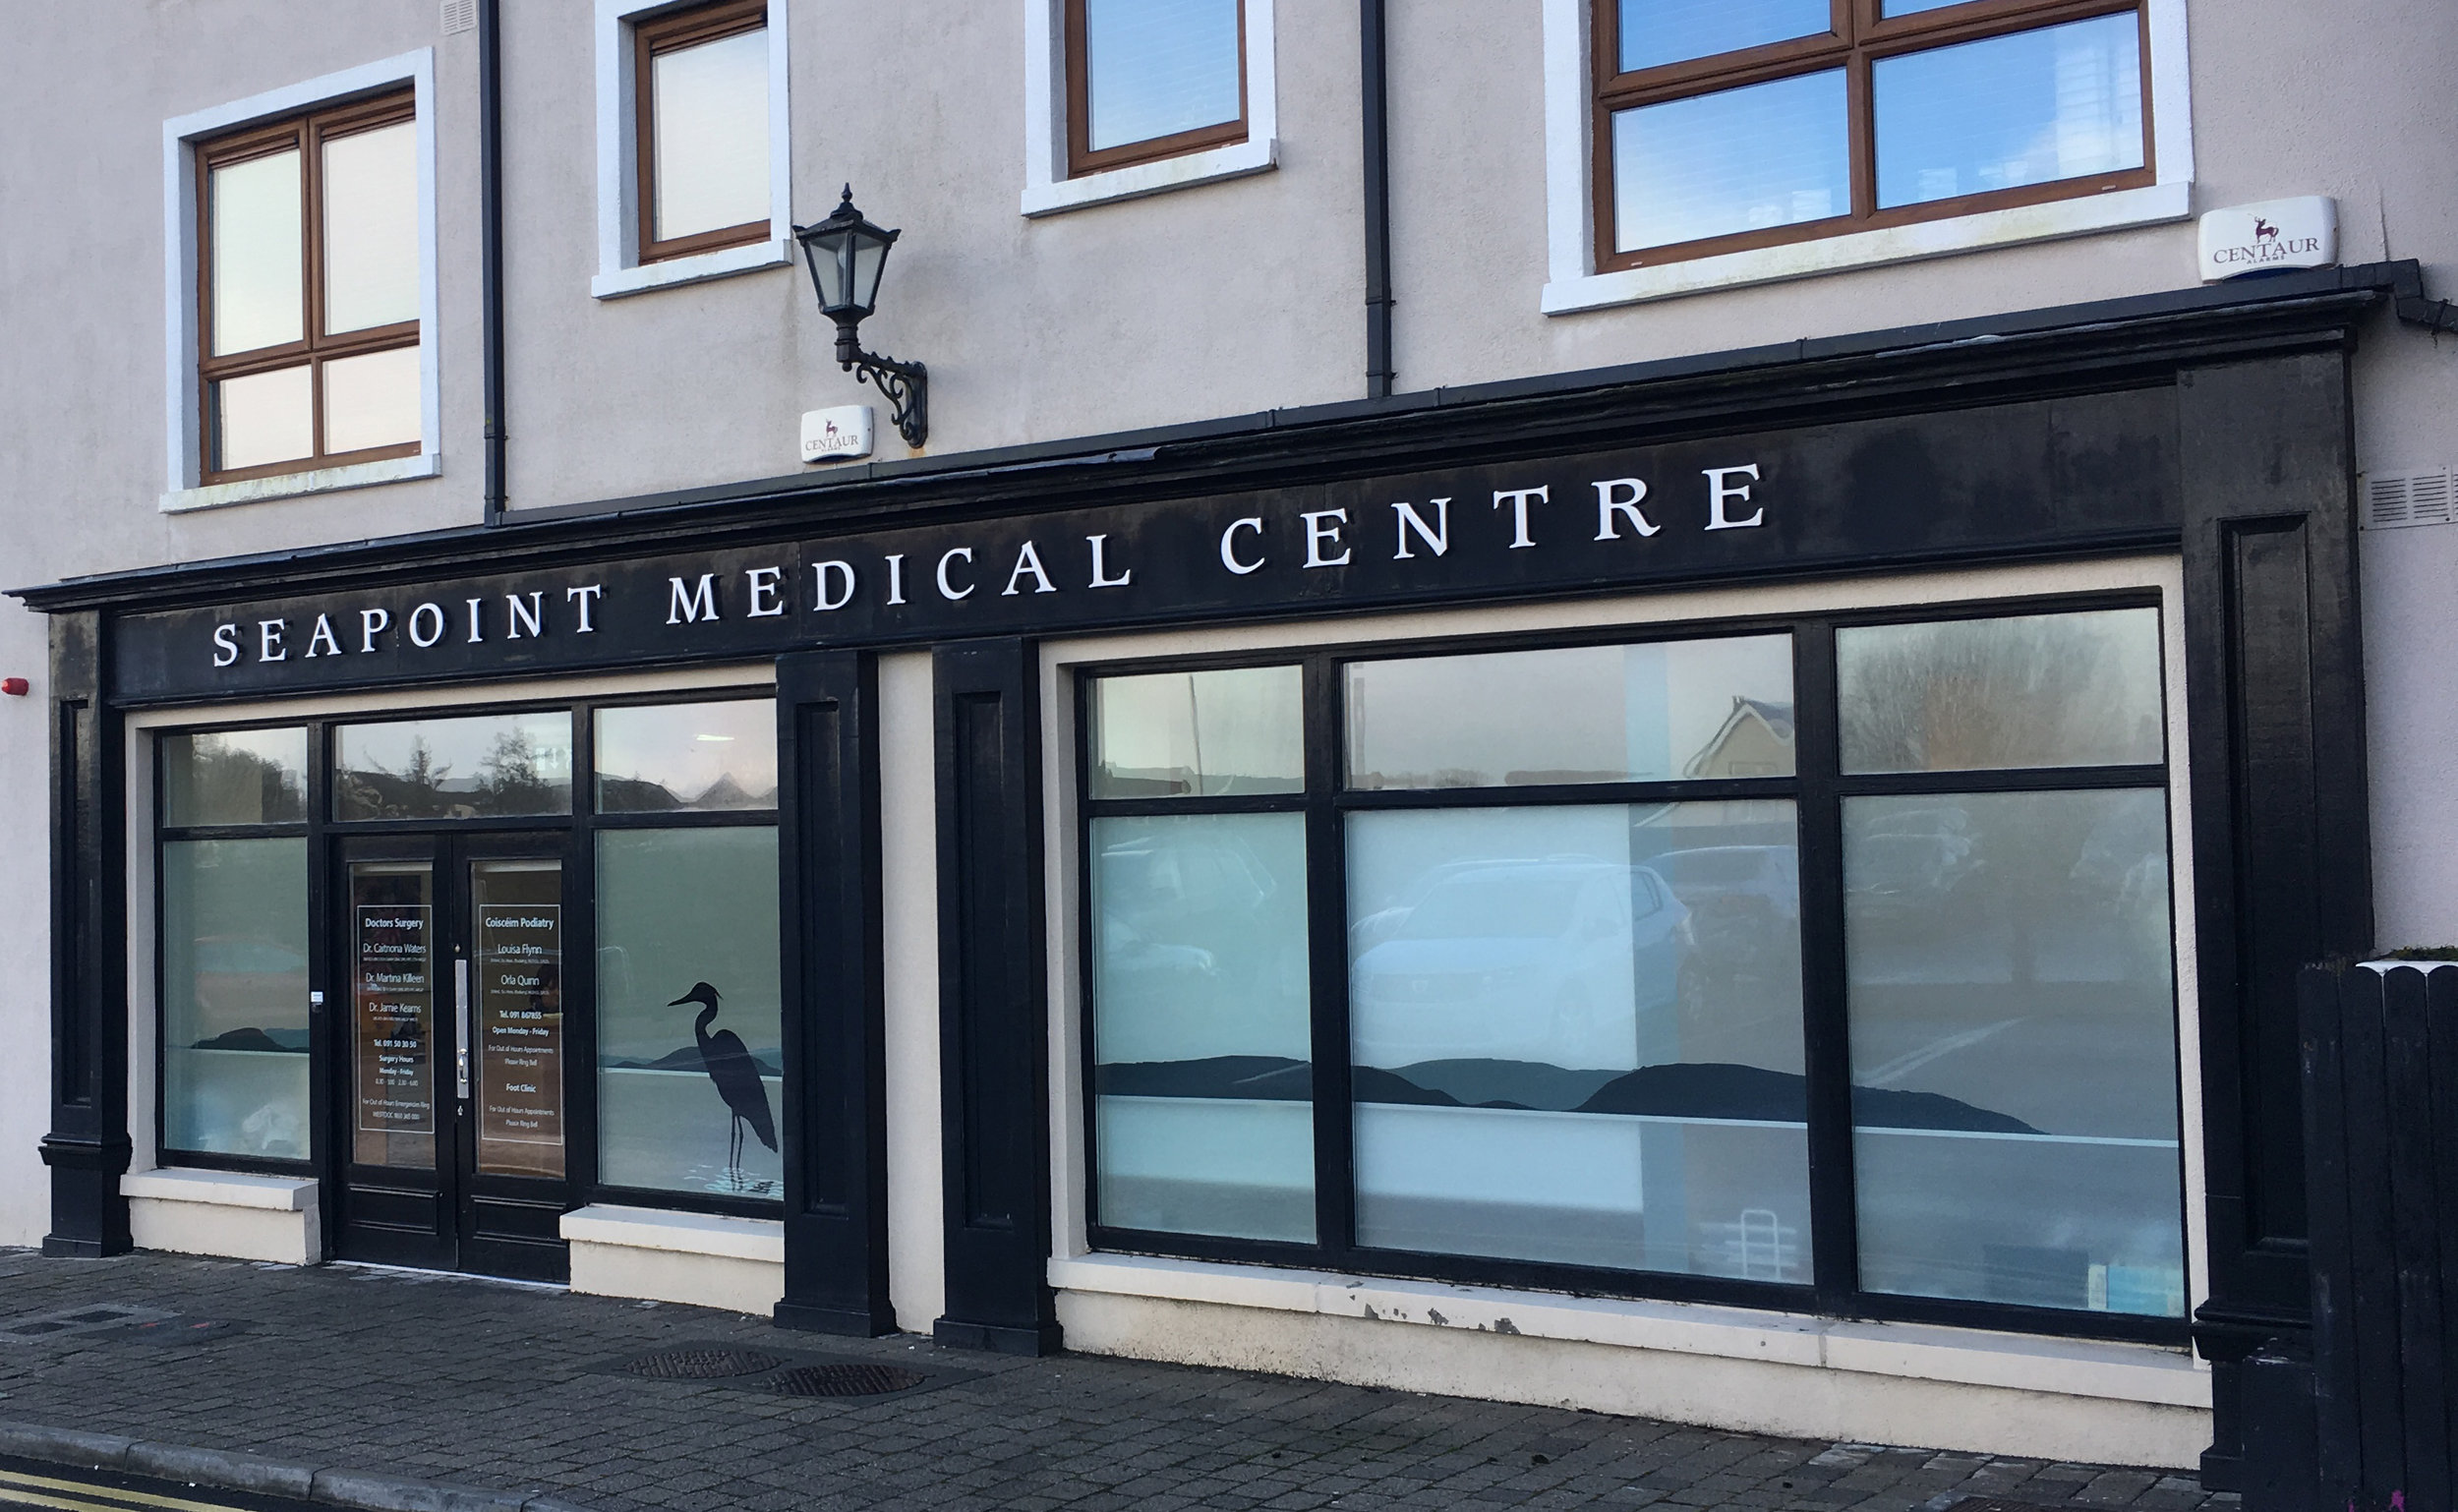 Seapoint Medical Centre